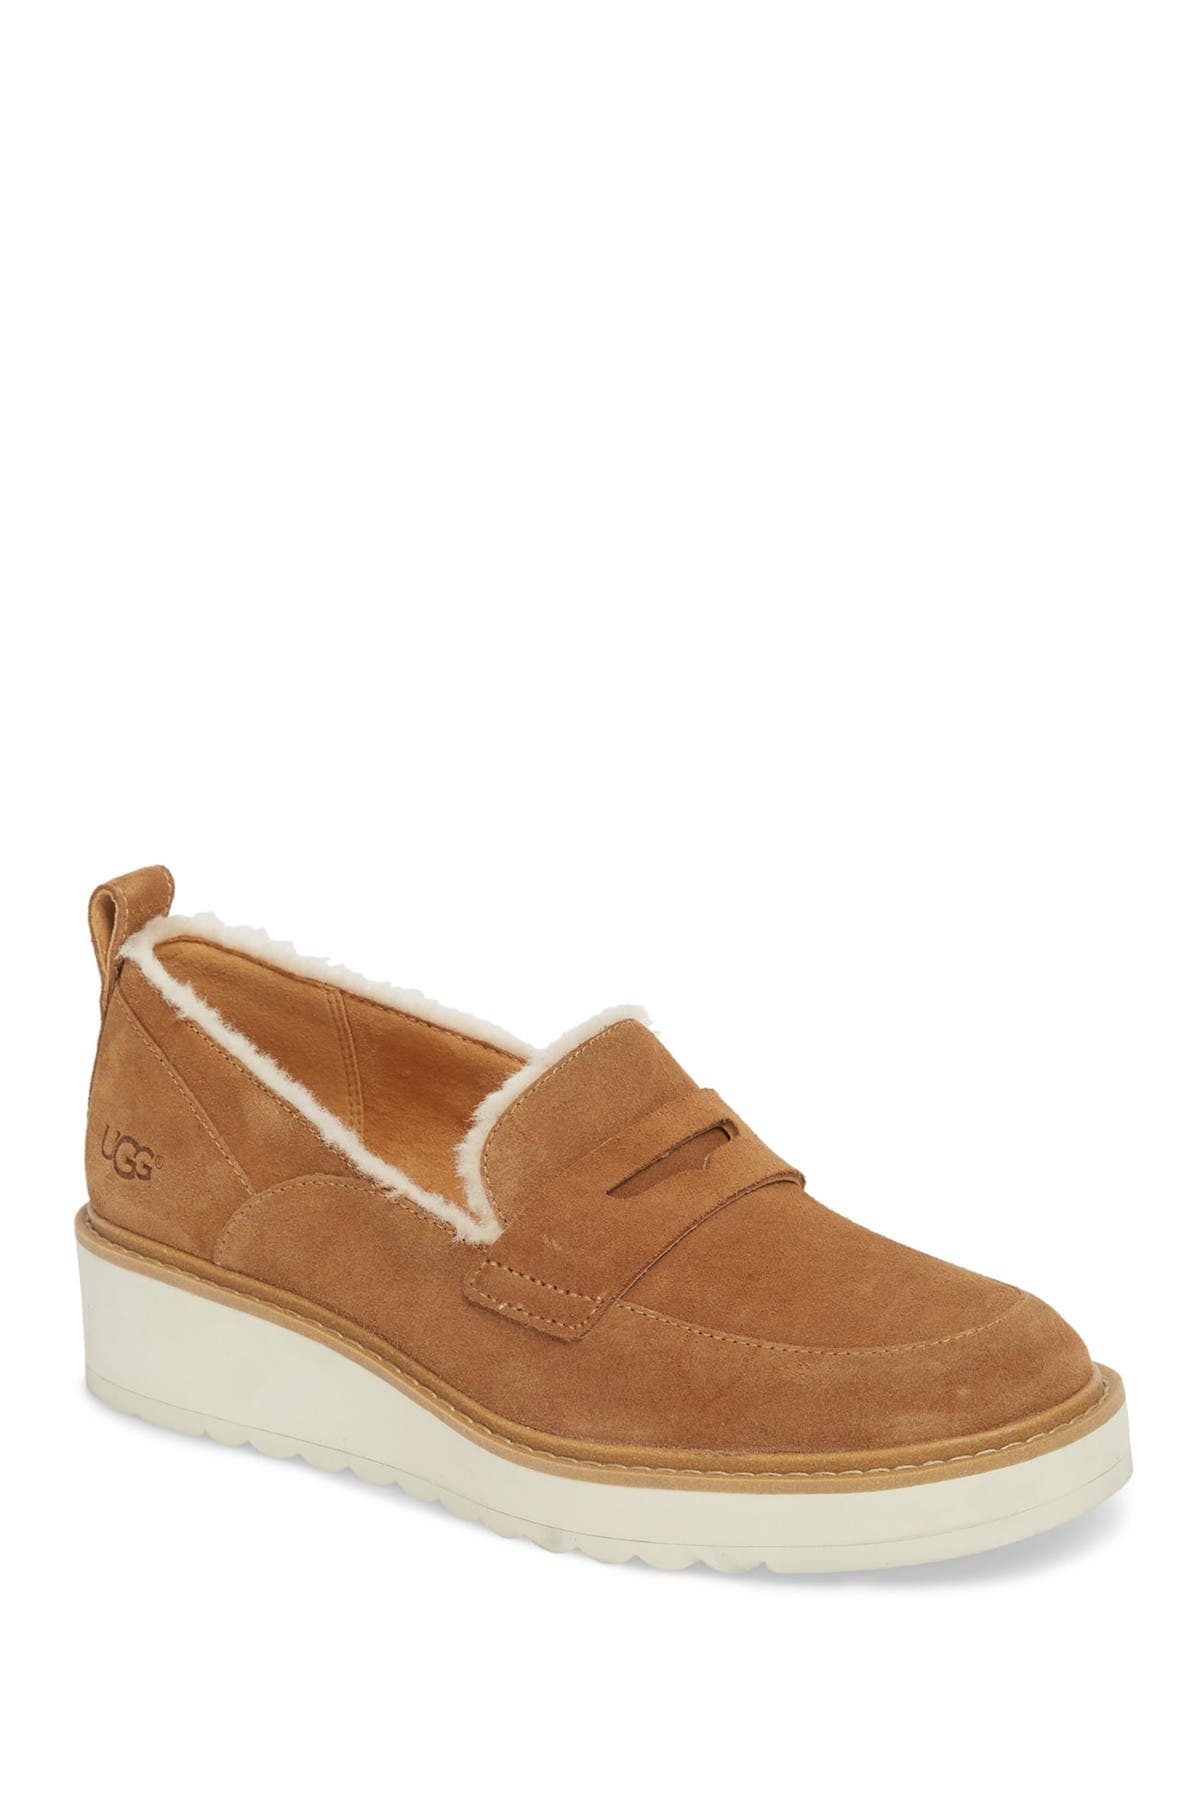 ugg atwater spill seam wedge loafer